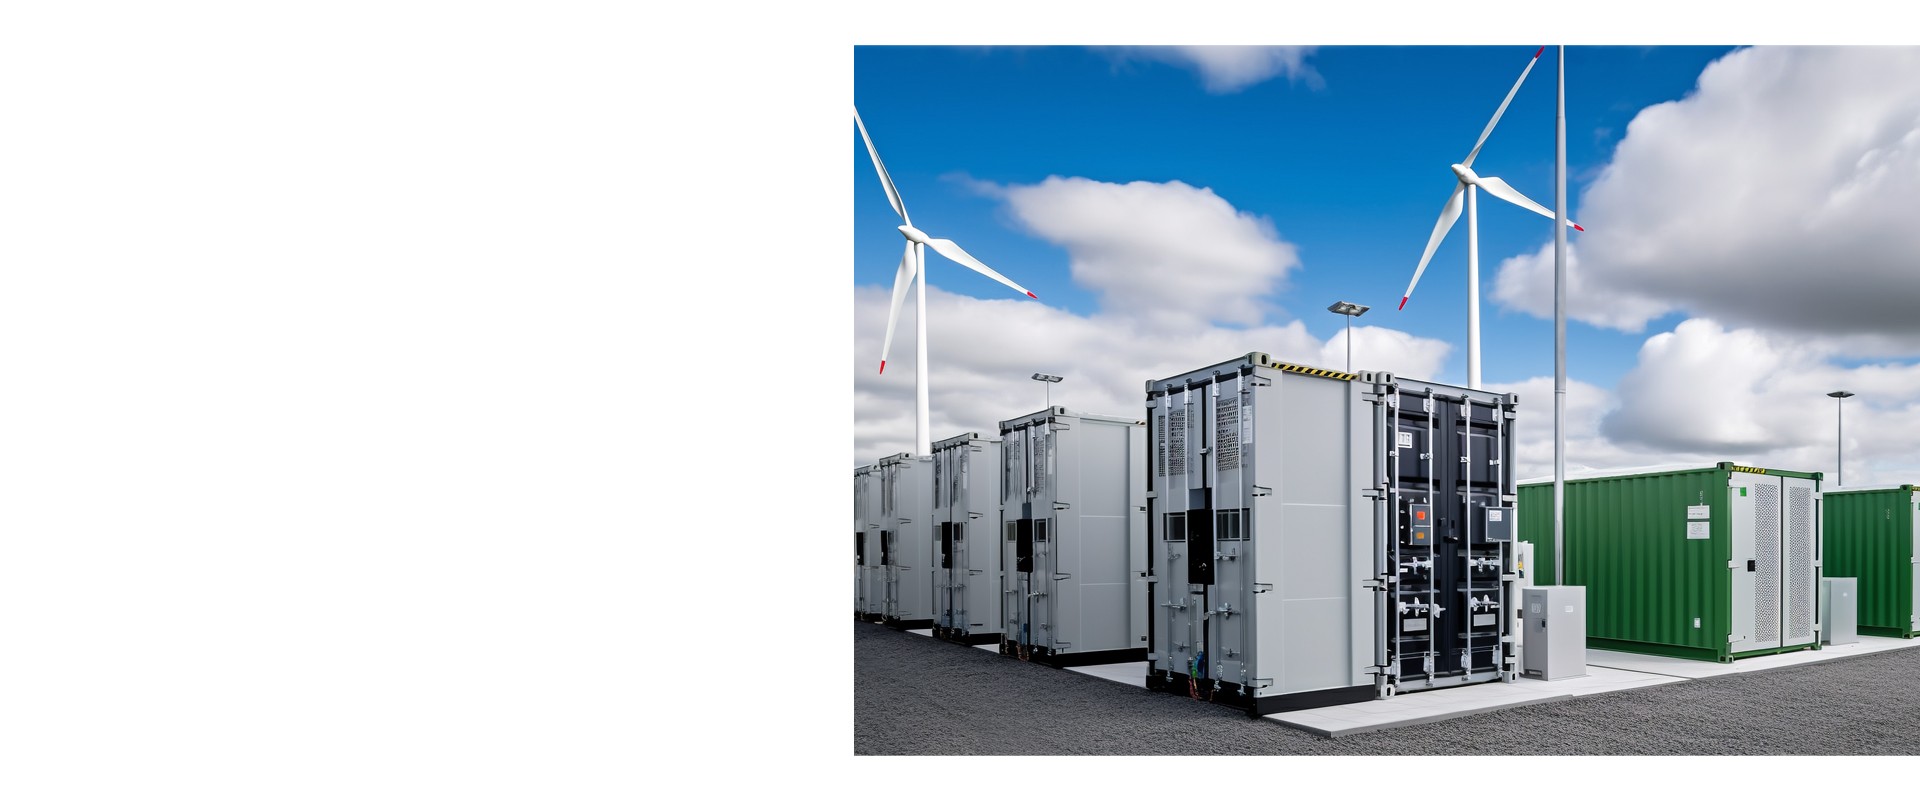 Energy storage on the power generation side